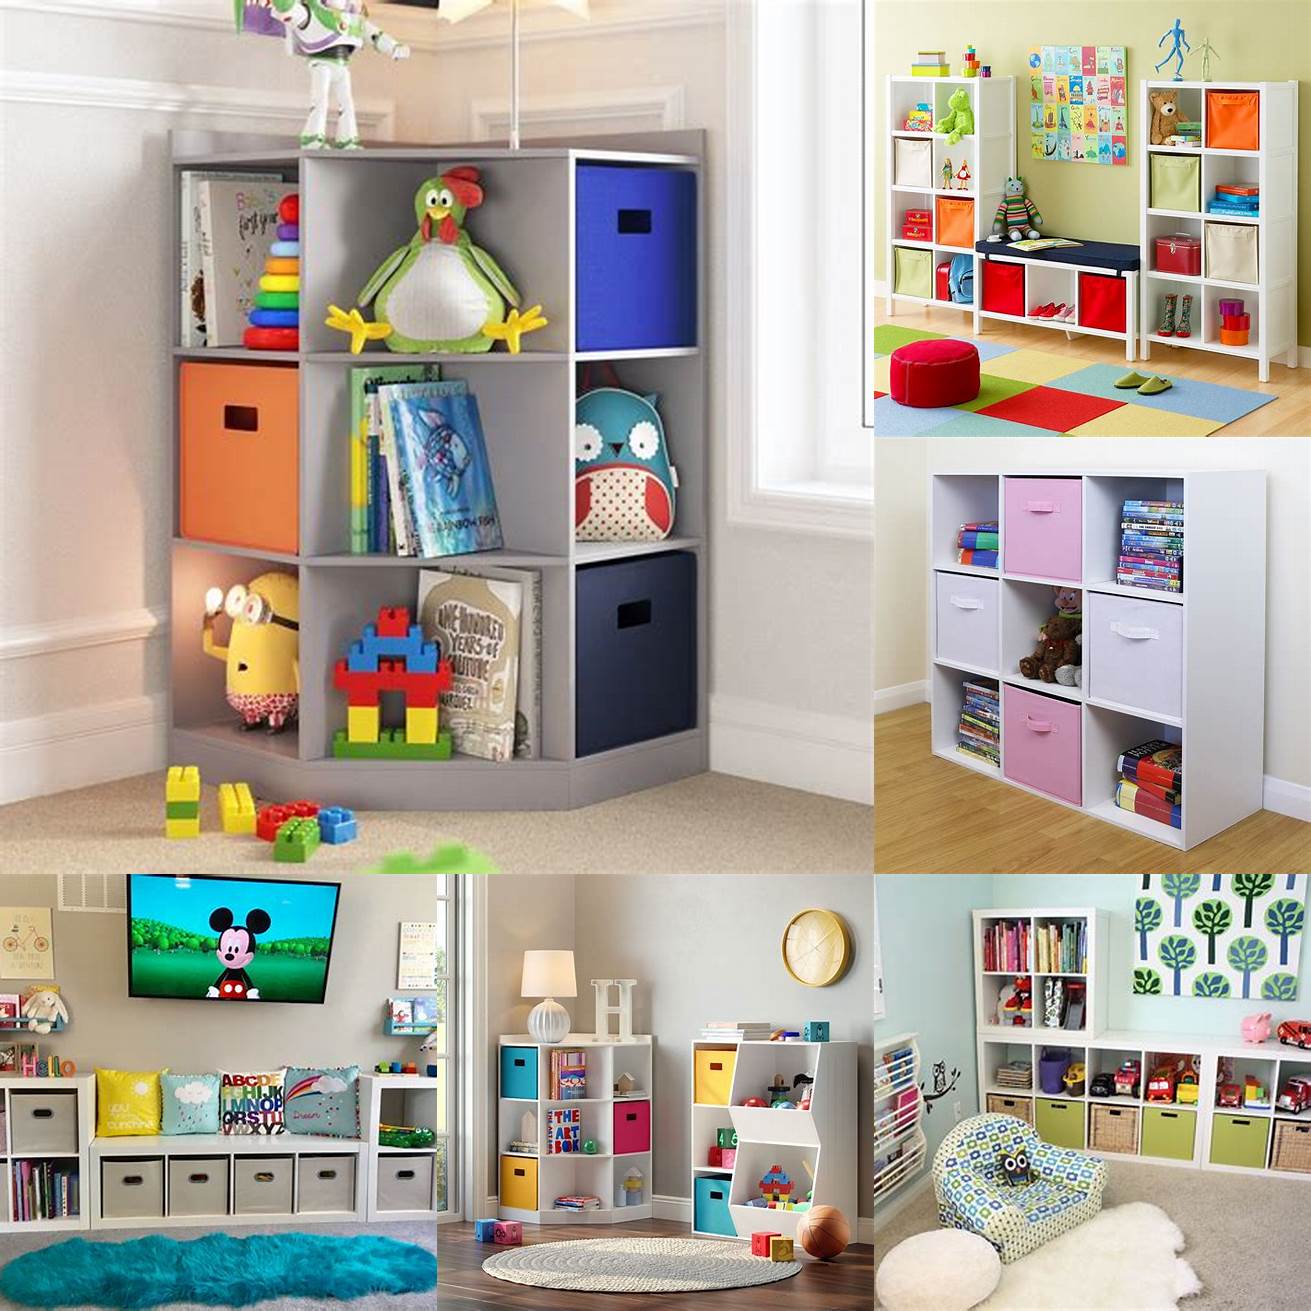 Cube storage units in a kids playroom